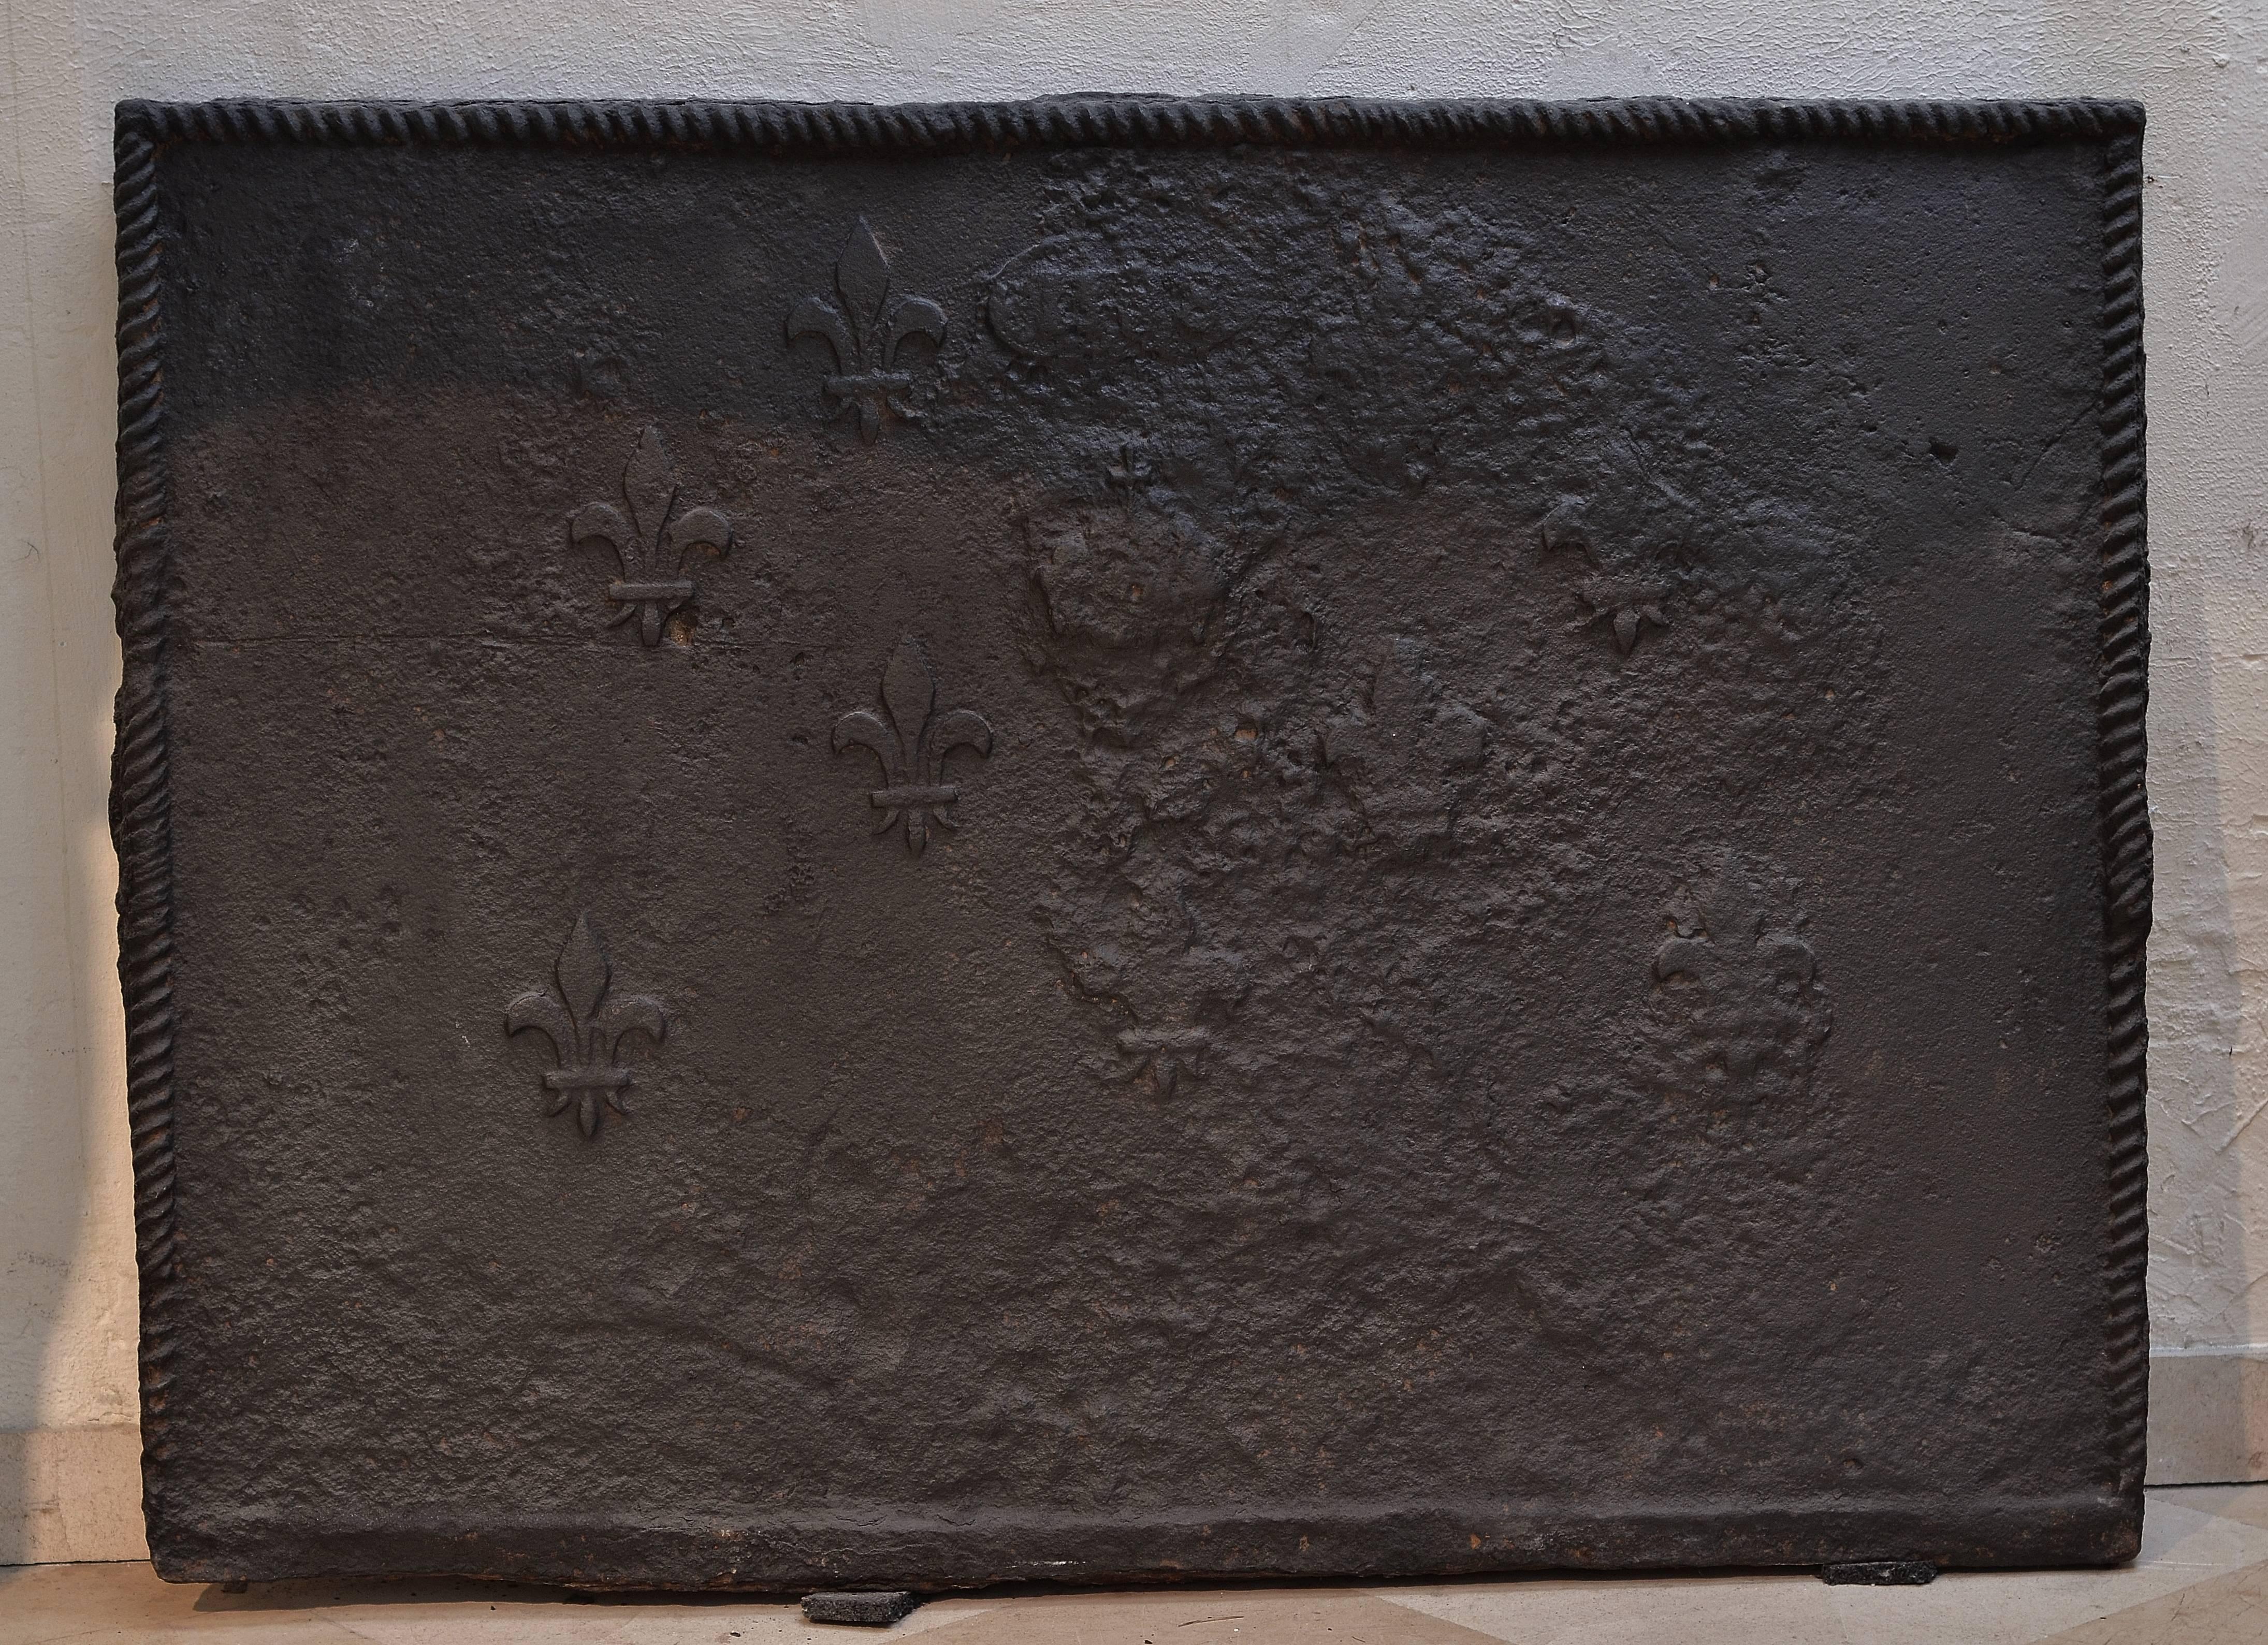 Beautiful rough cast iron antique fireback from the 18th century.
The with rope decorated edges are at some point 2 inch (5 cm) think.
From the original 9 